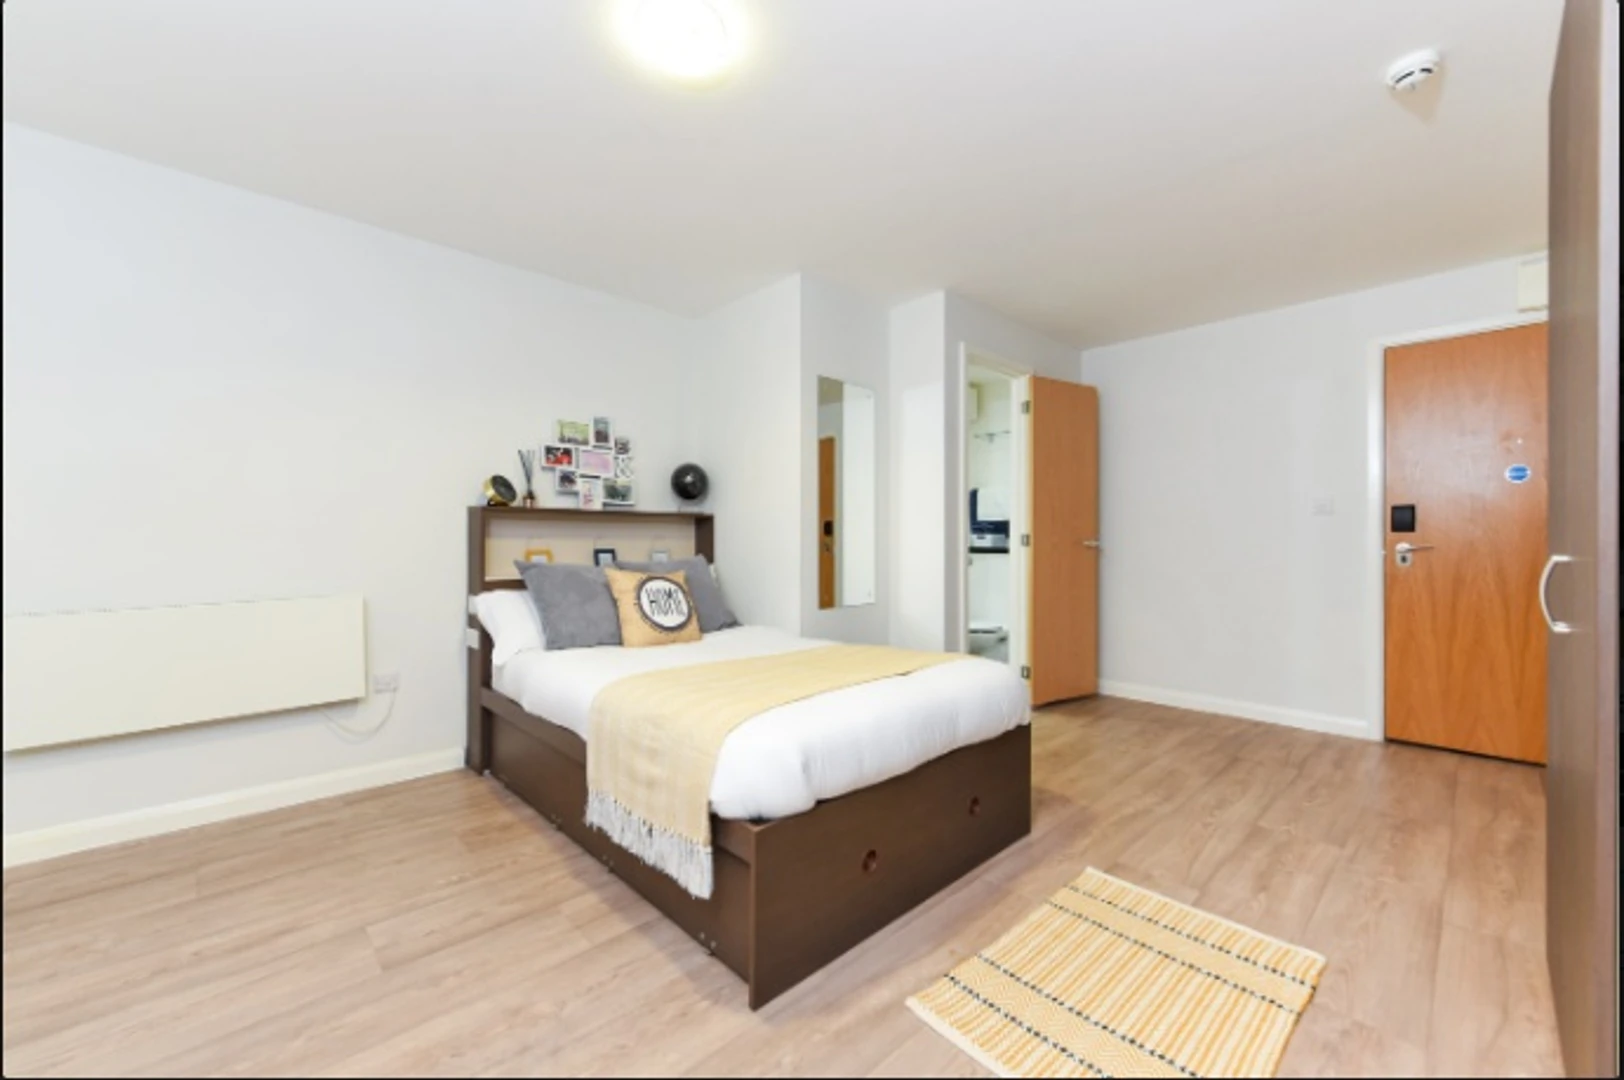 Renting rooms by the month in Swansea